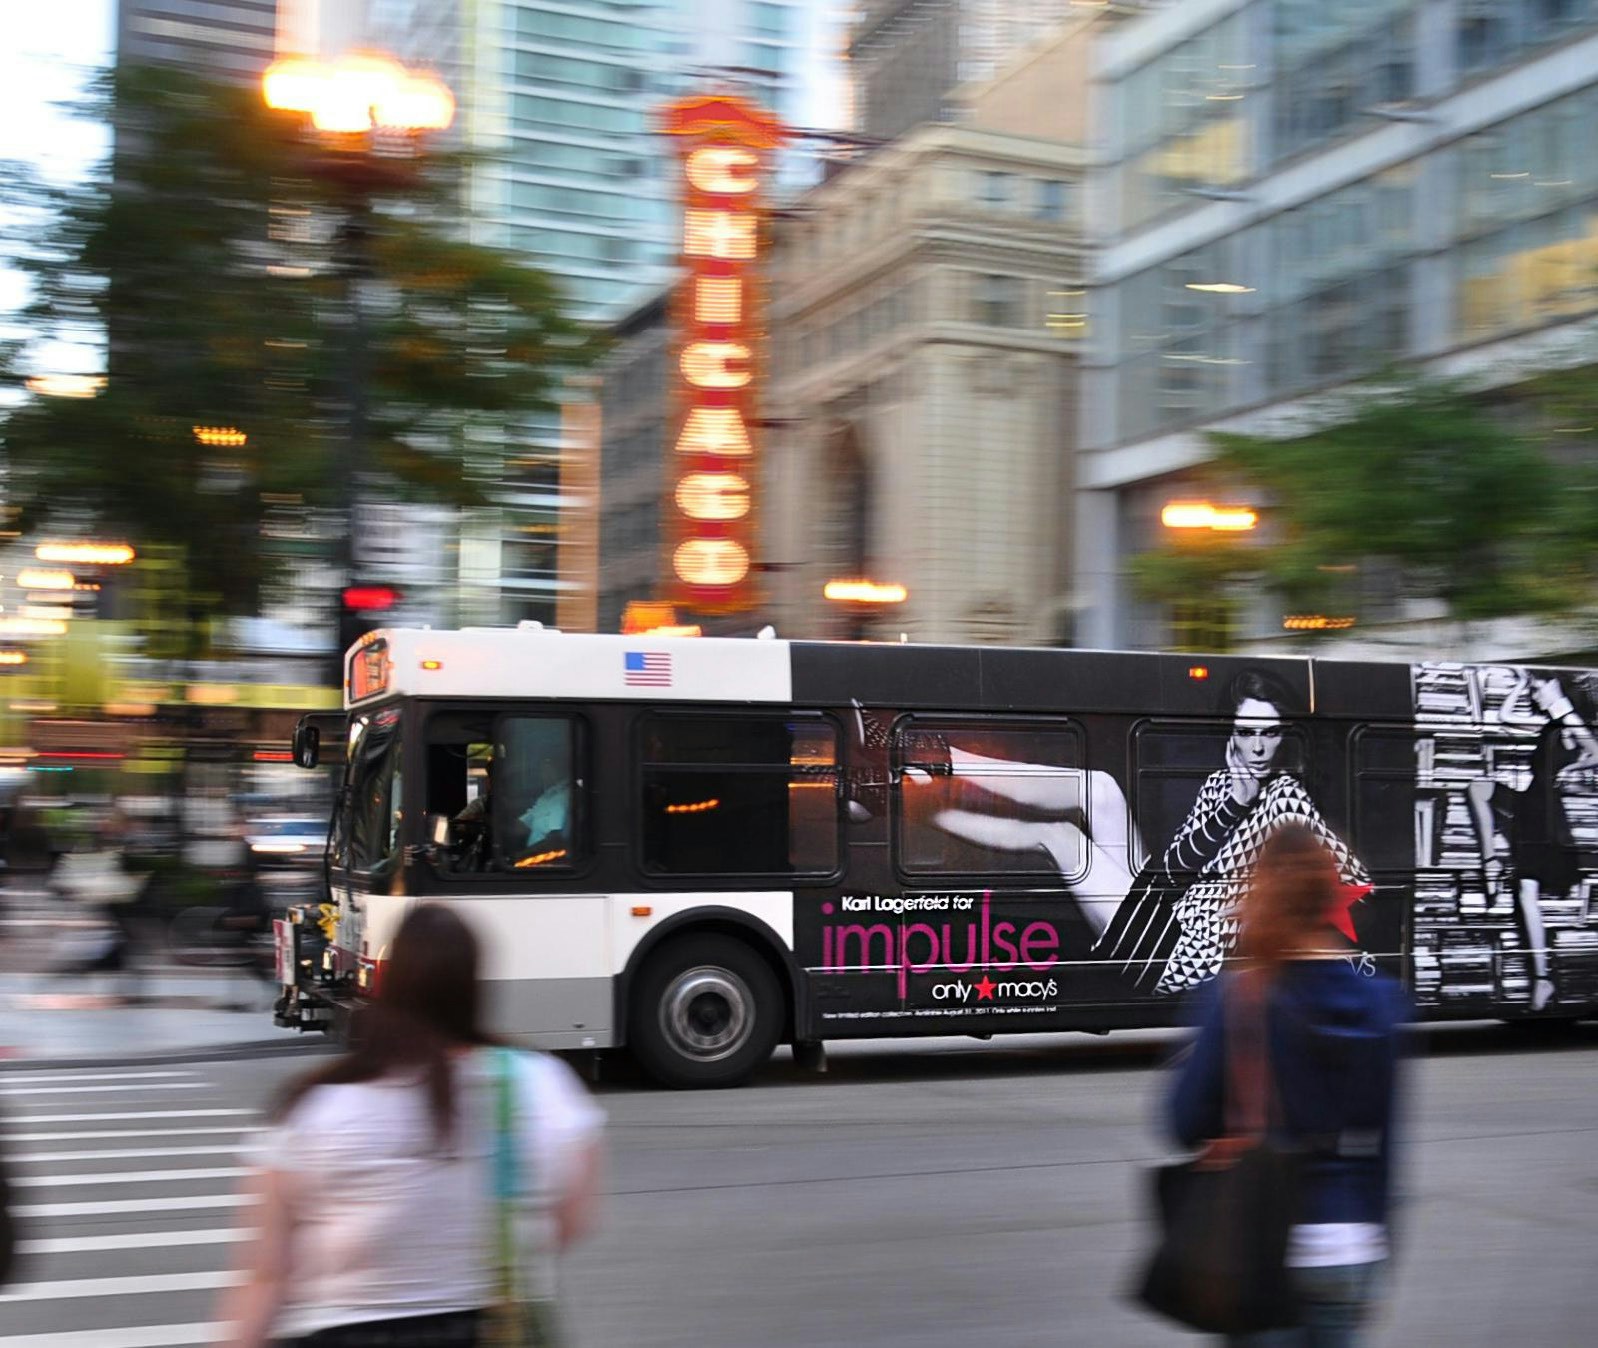 Bus wrap in Chicago